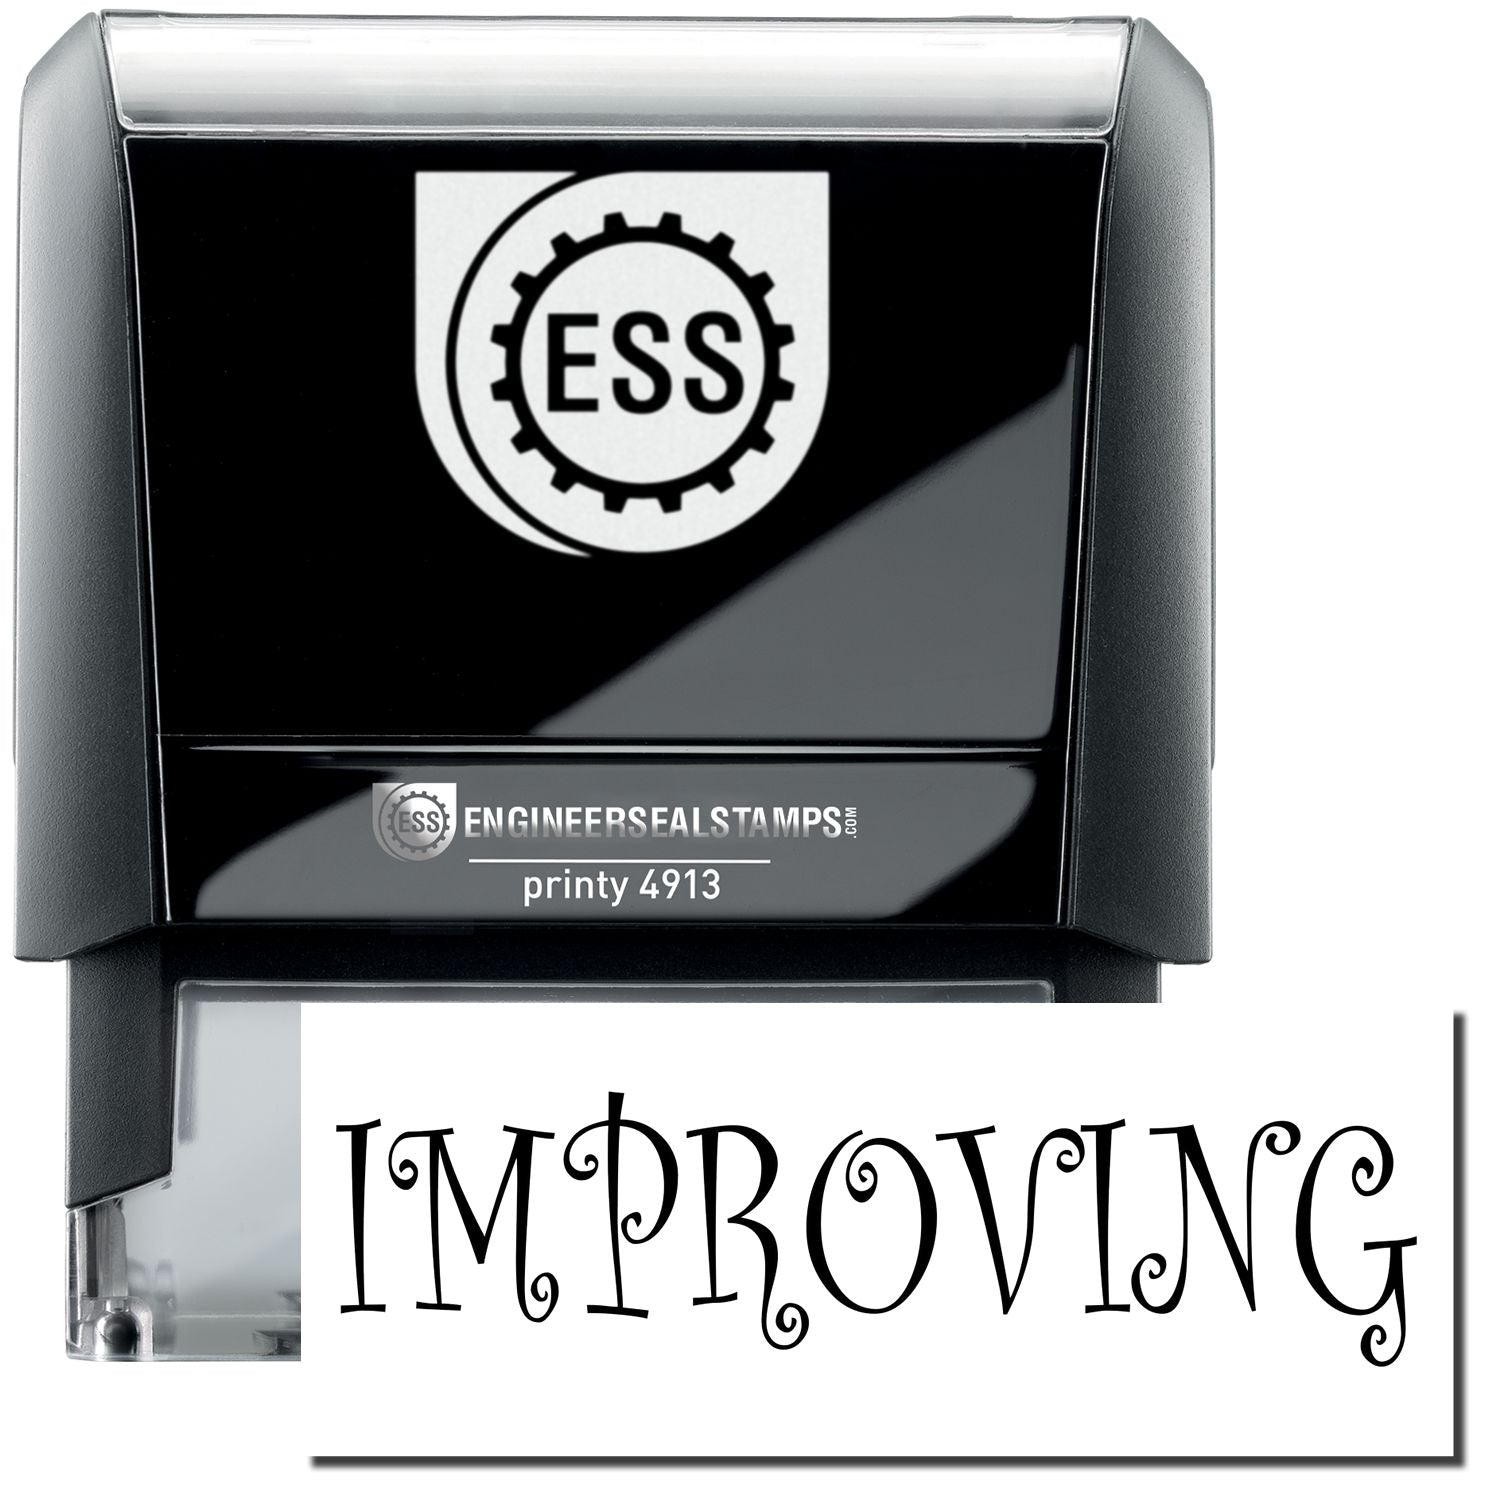 A self-inking stamp with a stamped image showing how the text "IMPROVING" in a large font is displayed by it.